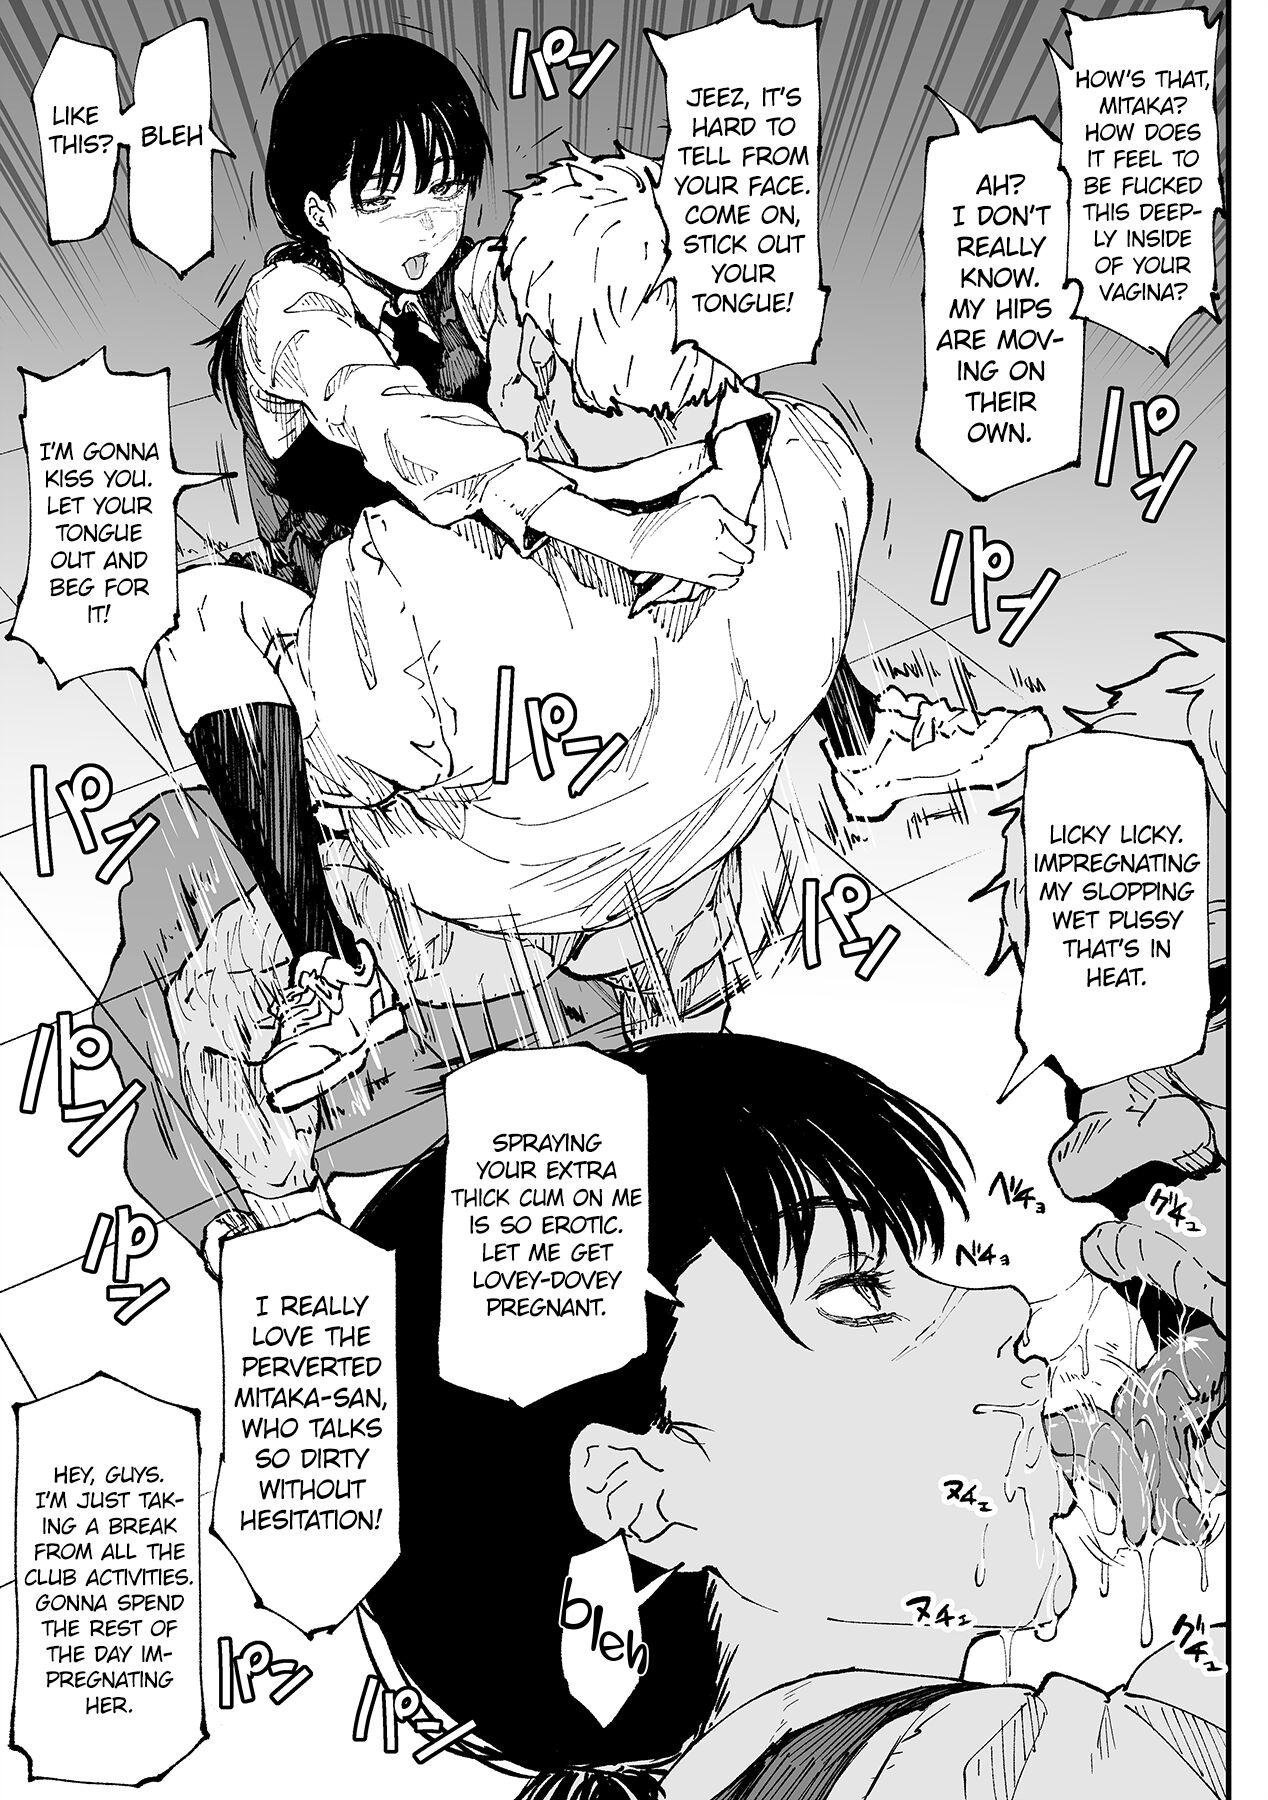 Hot Mitaka-san Does Her Best to Make you Hers - Chainsaw man Old - Page 4